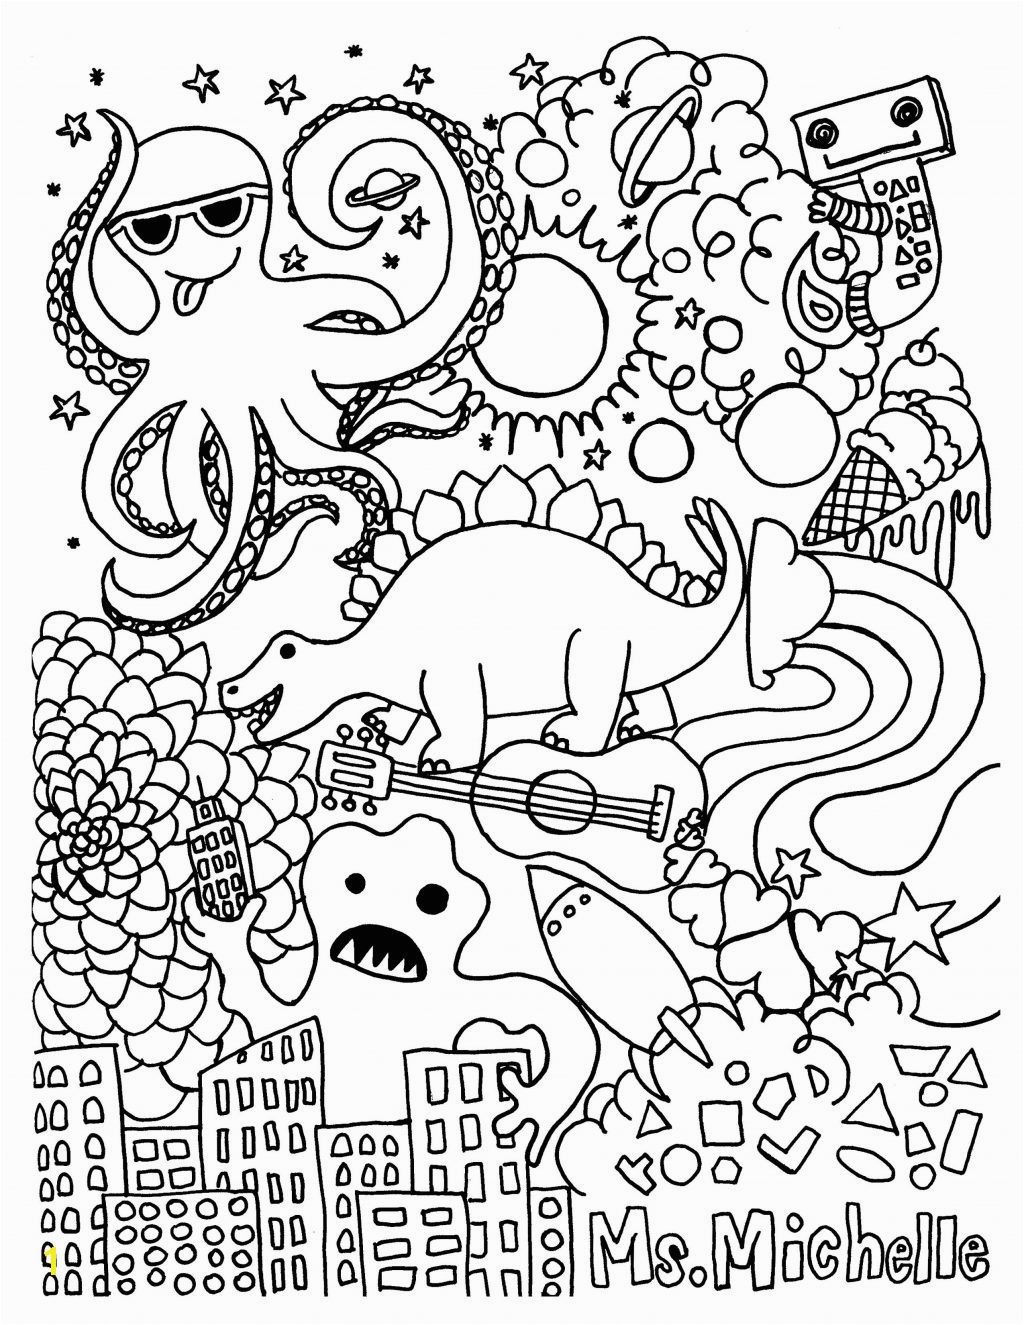 5 Senses Coloring Pages Lovely 5 Senses Coloring Pages Beautiful City Coloring Pages Msainfo 5